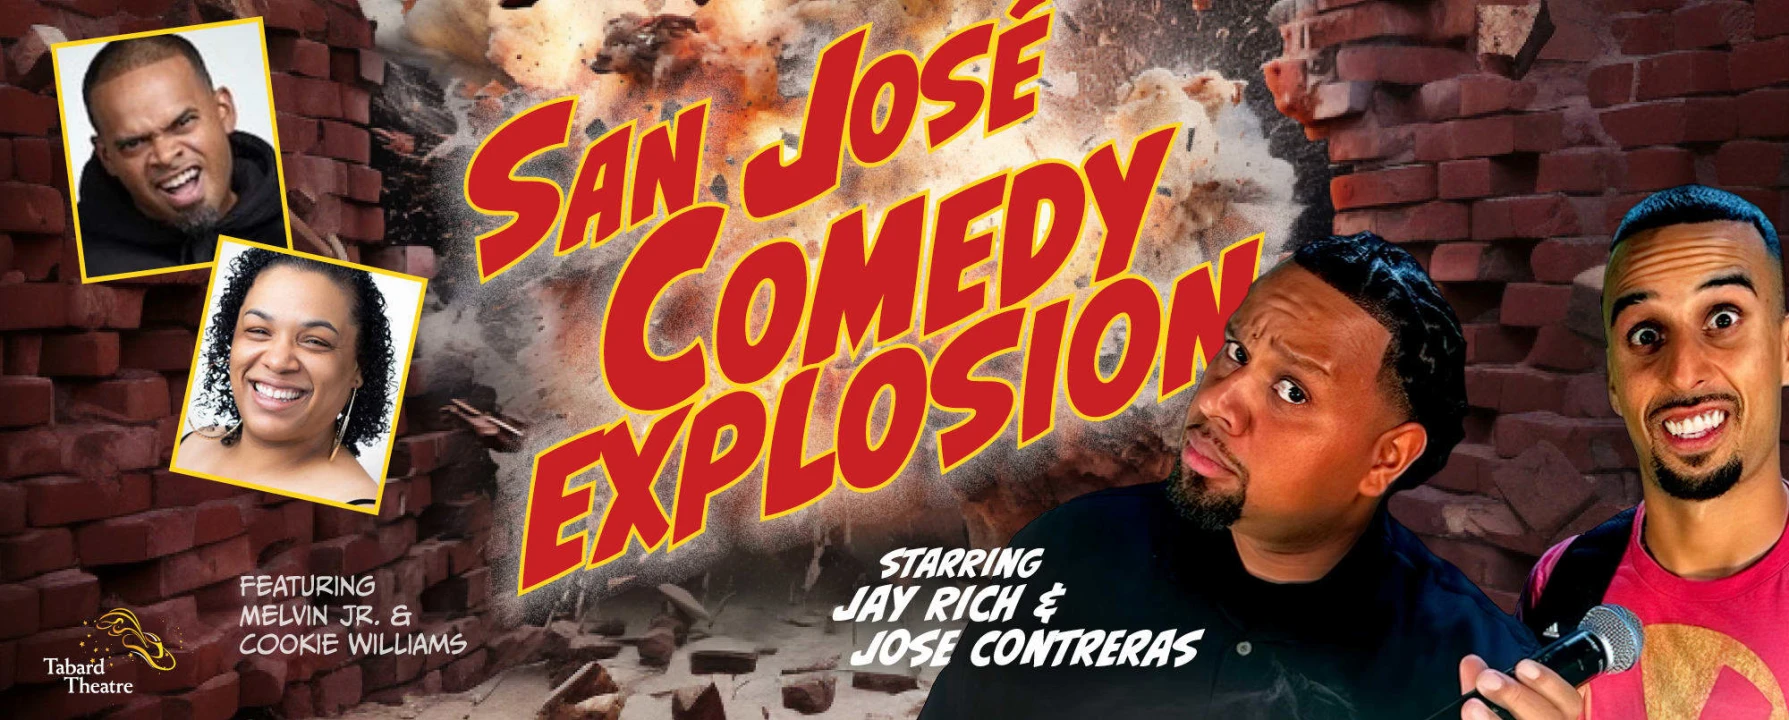 The San Jose Comedy Explosion Starring Jay Rich and Jose Contreras: What to expect - 1